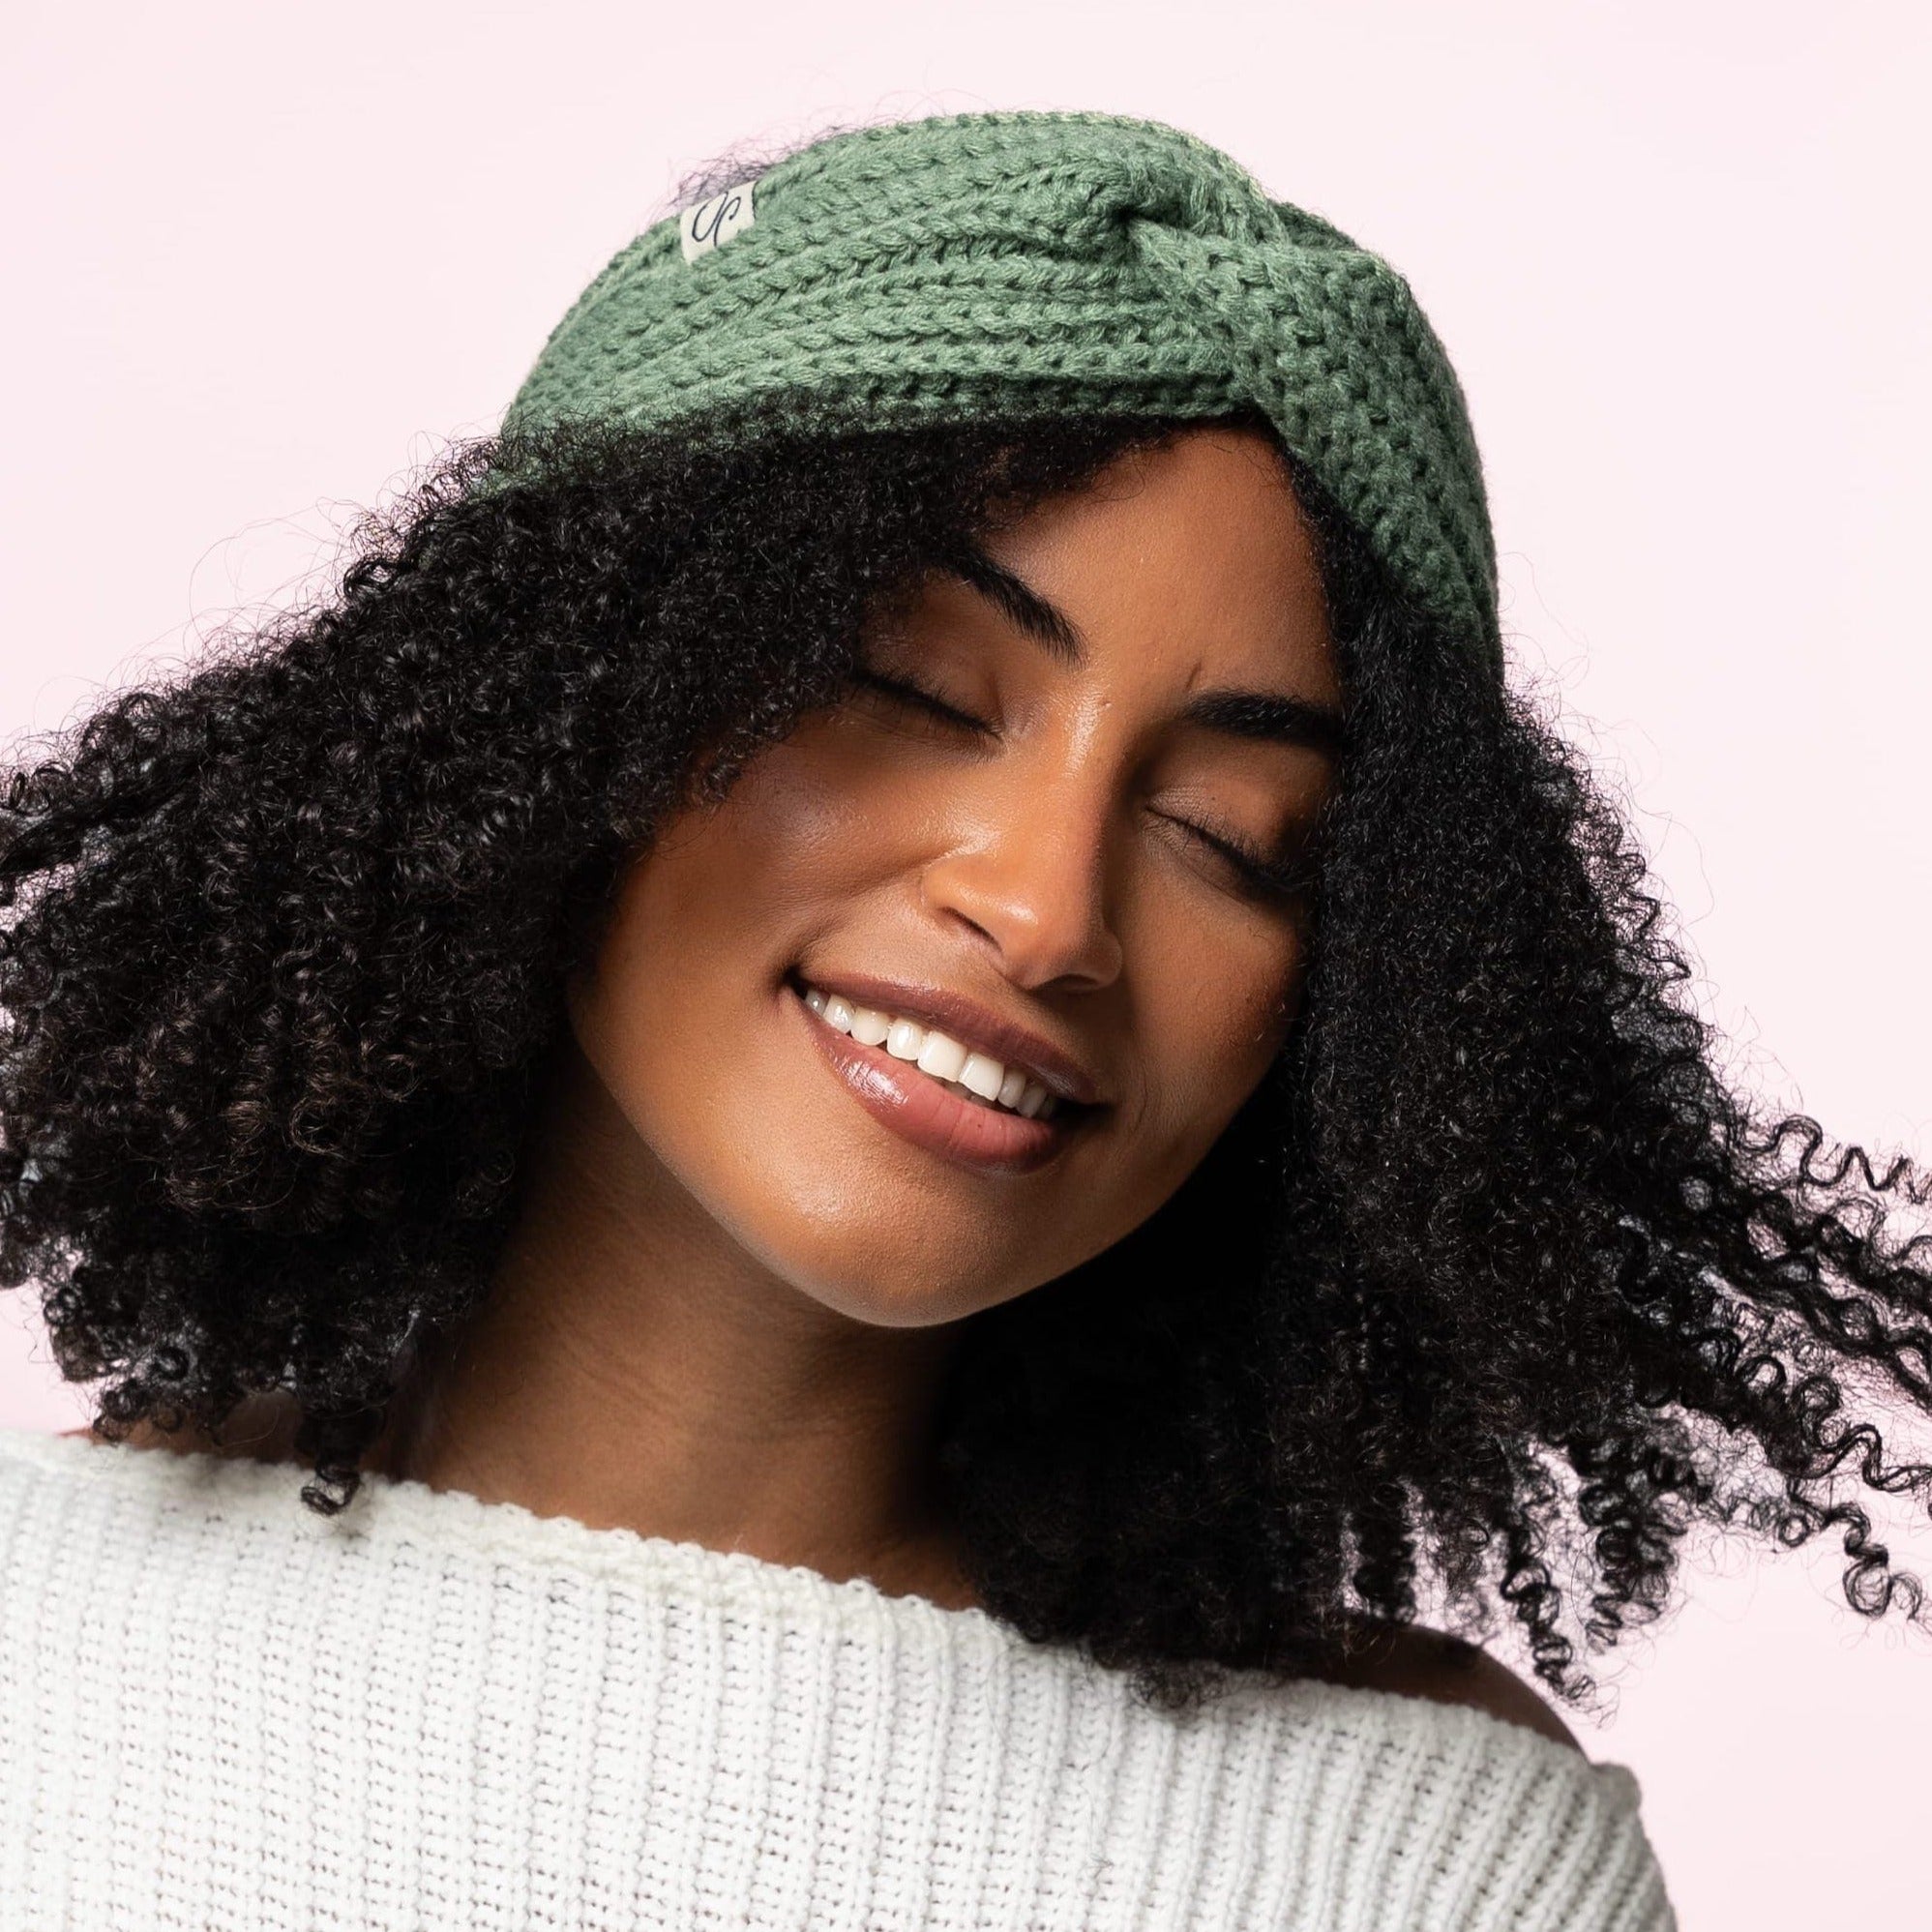 Only Curls Satin Lined Knitted Headband - Olive - Only Curls